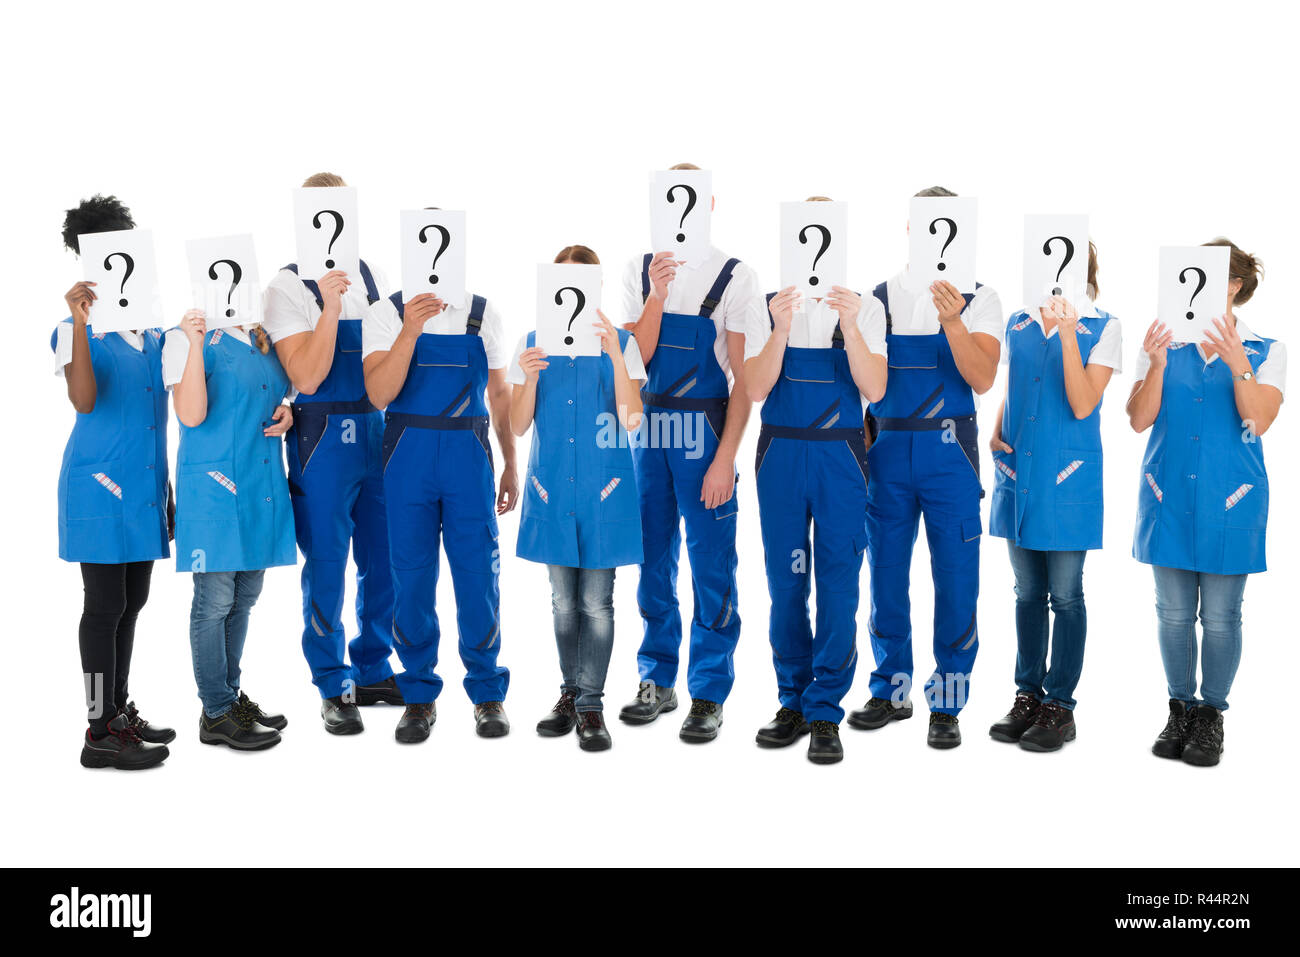 Janitors Hiding Faces With Question Mark Signs Stock Photo